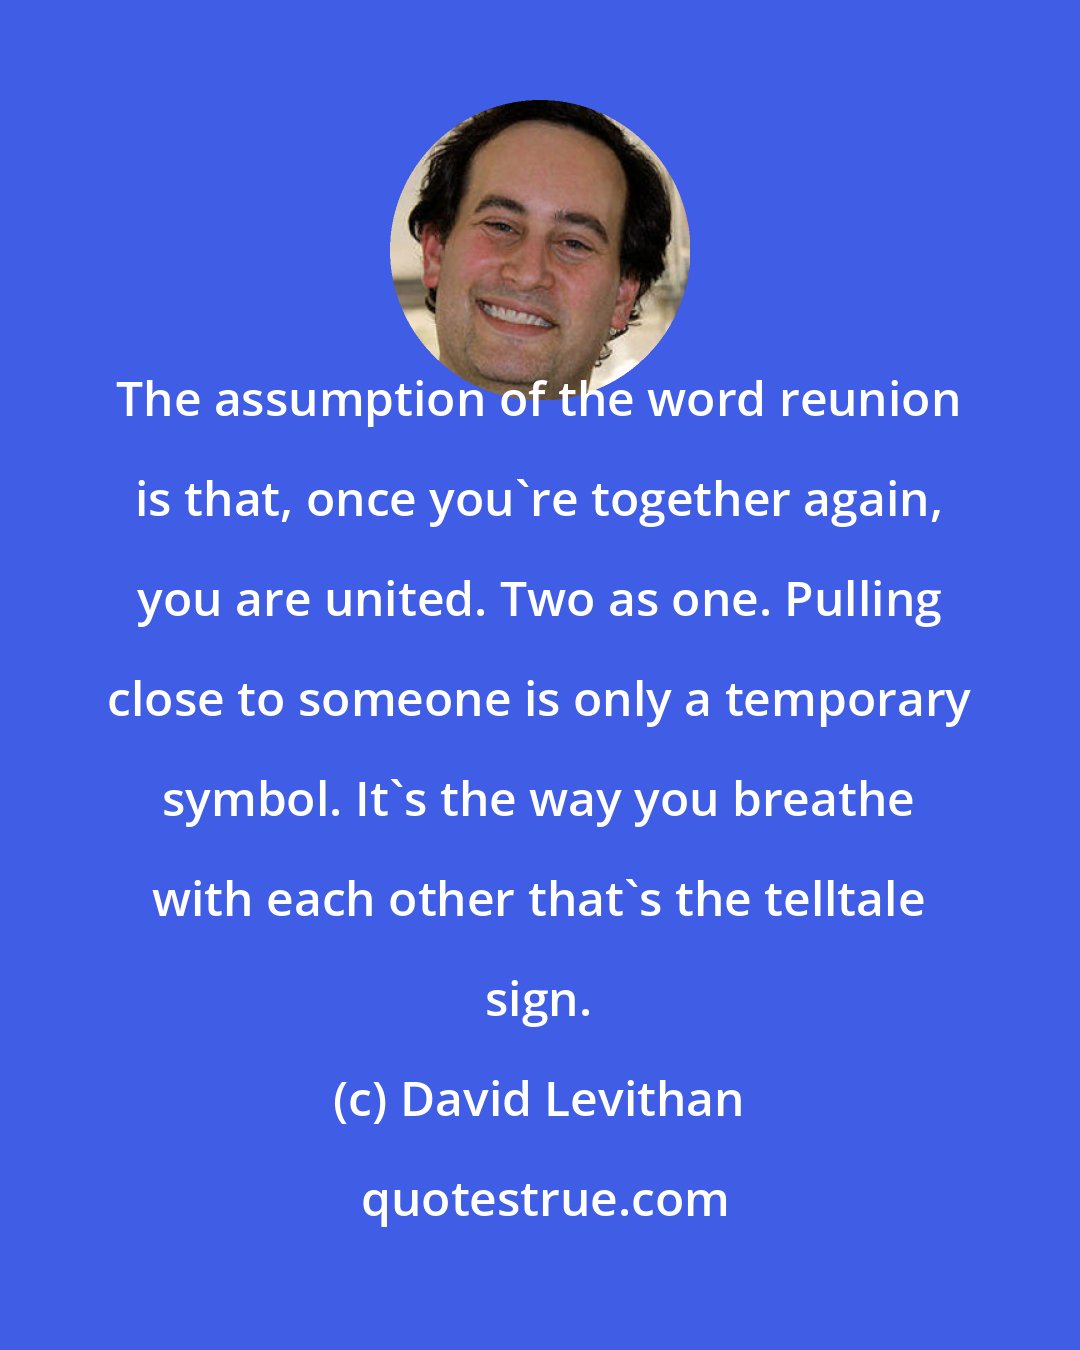 David Levithan: The assumption of the word reunion is that, once you're together again, you are united. Two as one. Pulling close to someone is only a temporary symbol. It's the way you breathe with each other that's the telltale sign.